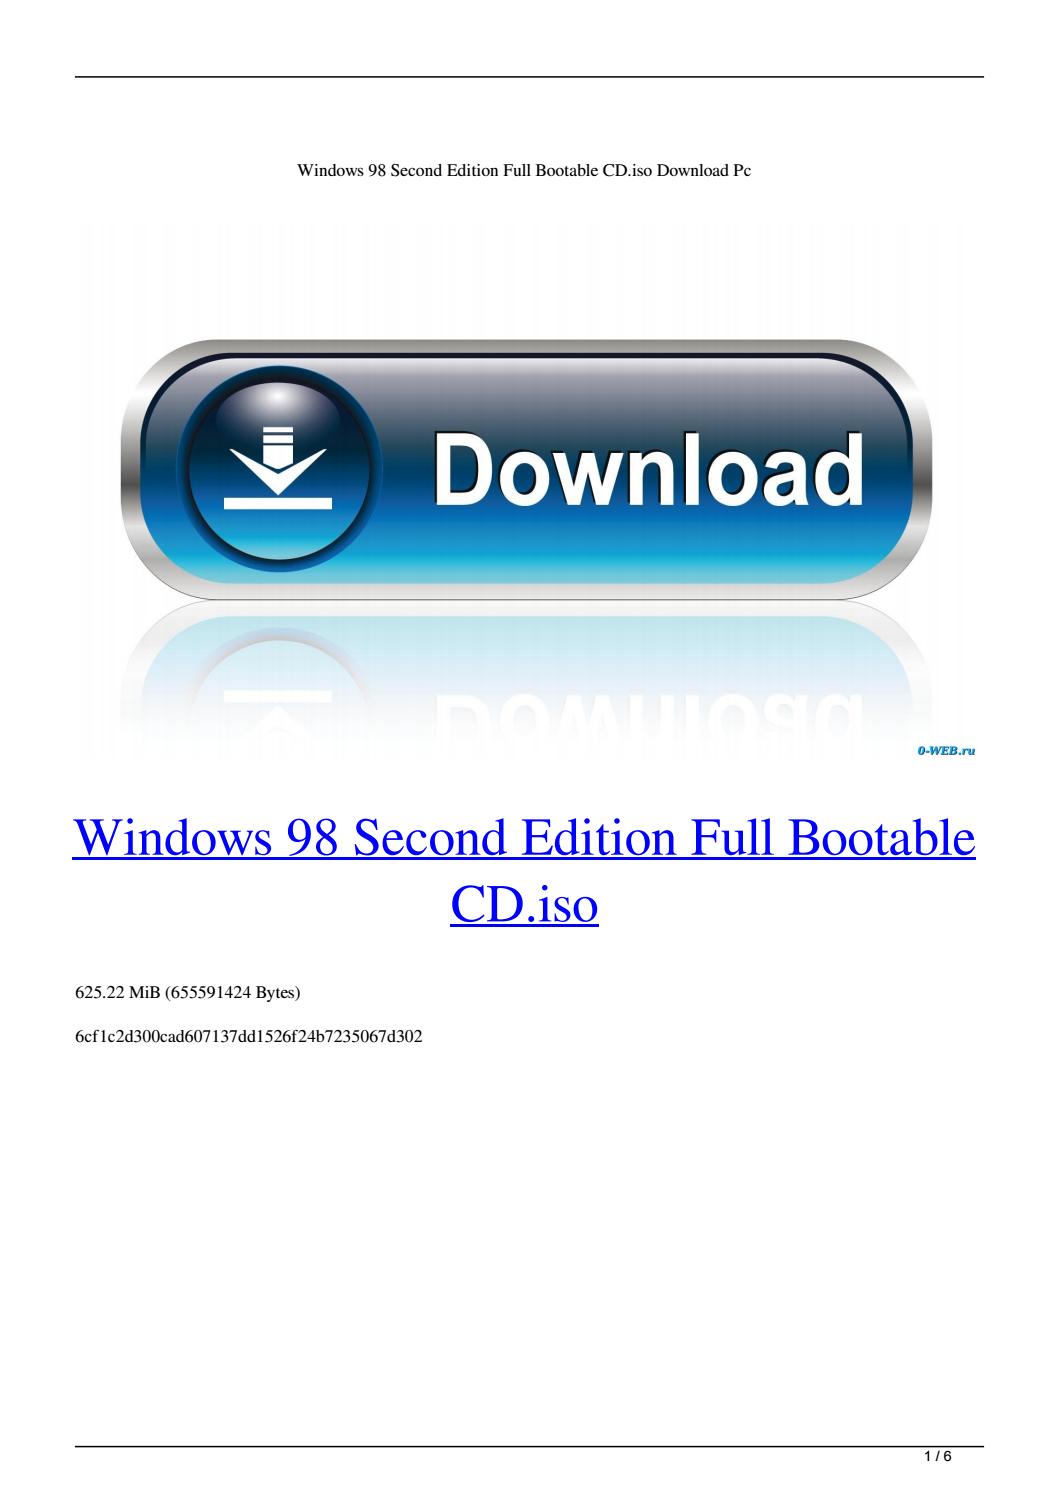 Win98se boot iso download